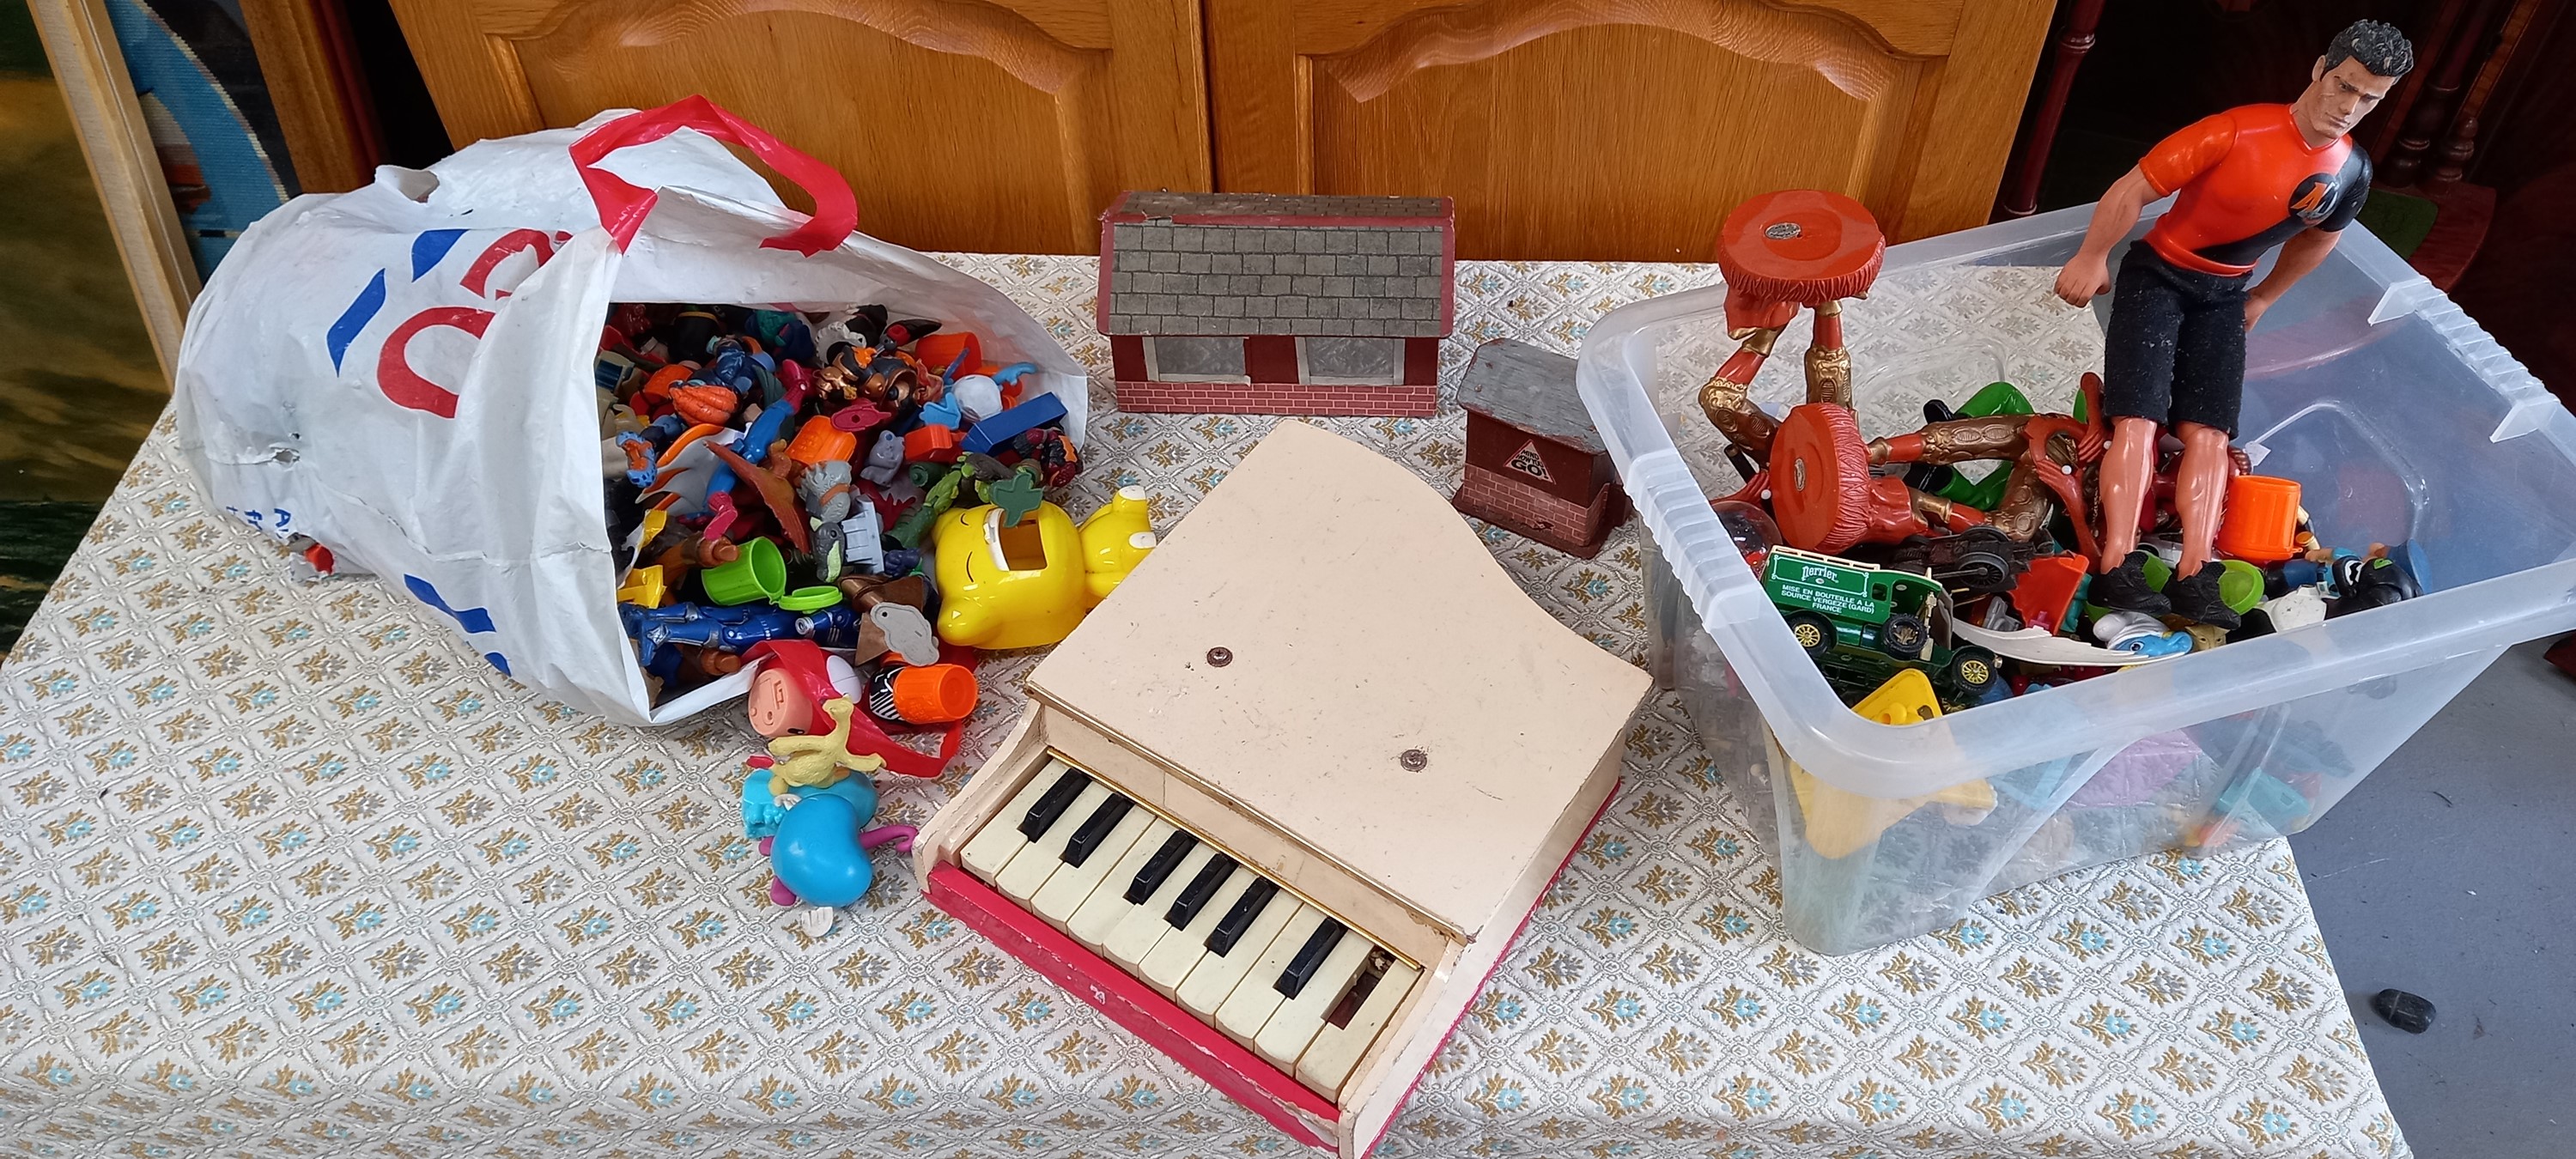 A vintage toy piano, model railway buildings and other toys.